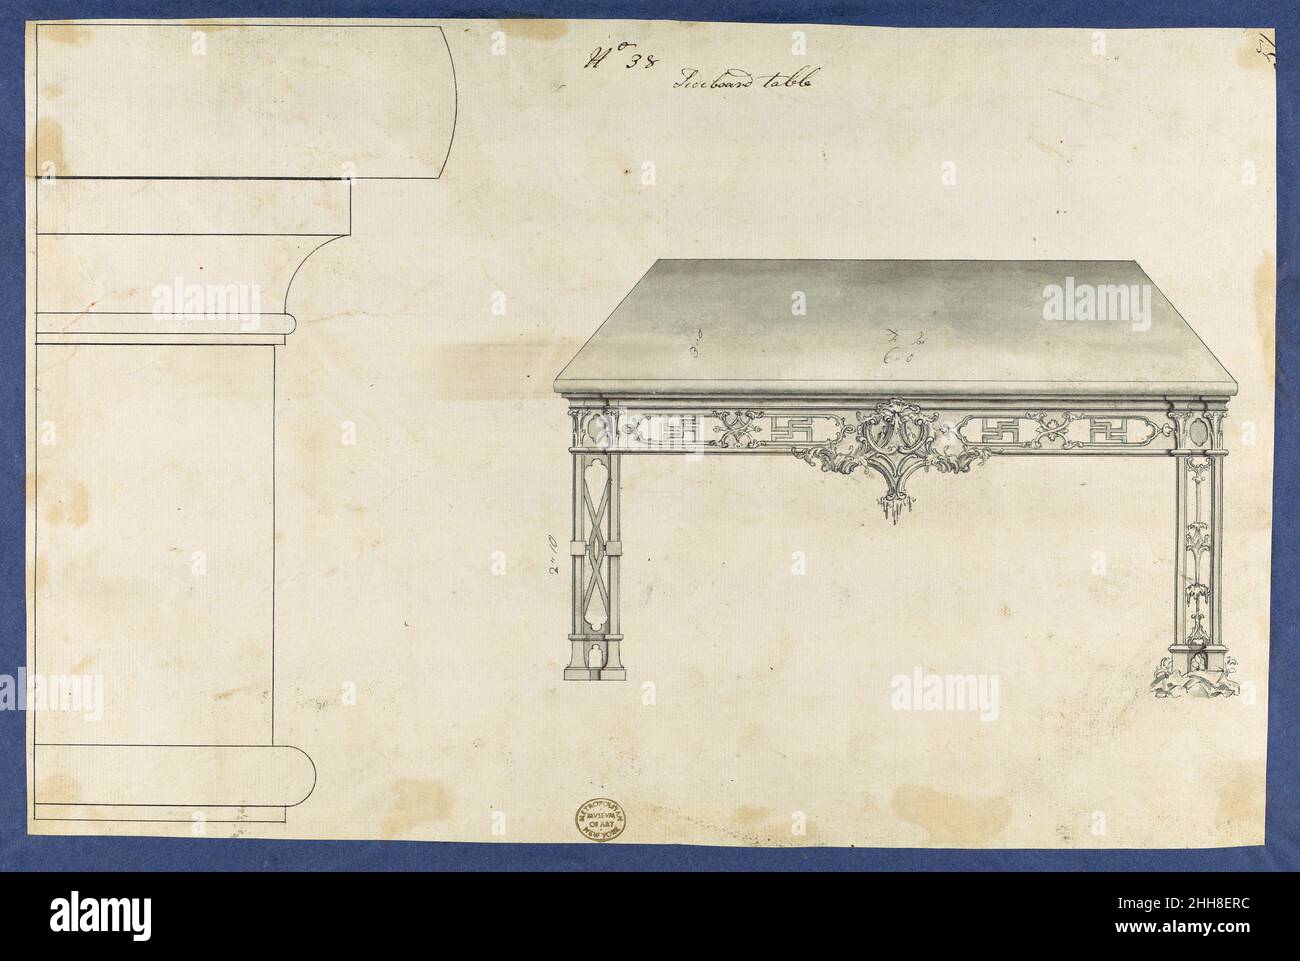 Sideboard Table, from Chippendale Drawings, Vol. II 1753 Thomas Chippendale British. Sideboard Table, from Chippendale Drawings, Vol. II  390614 Stock Photo